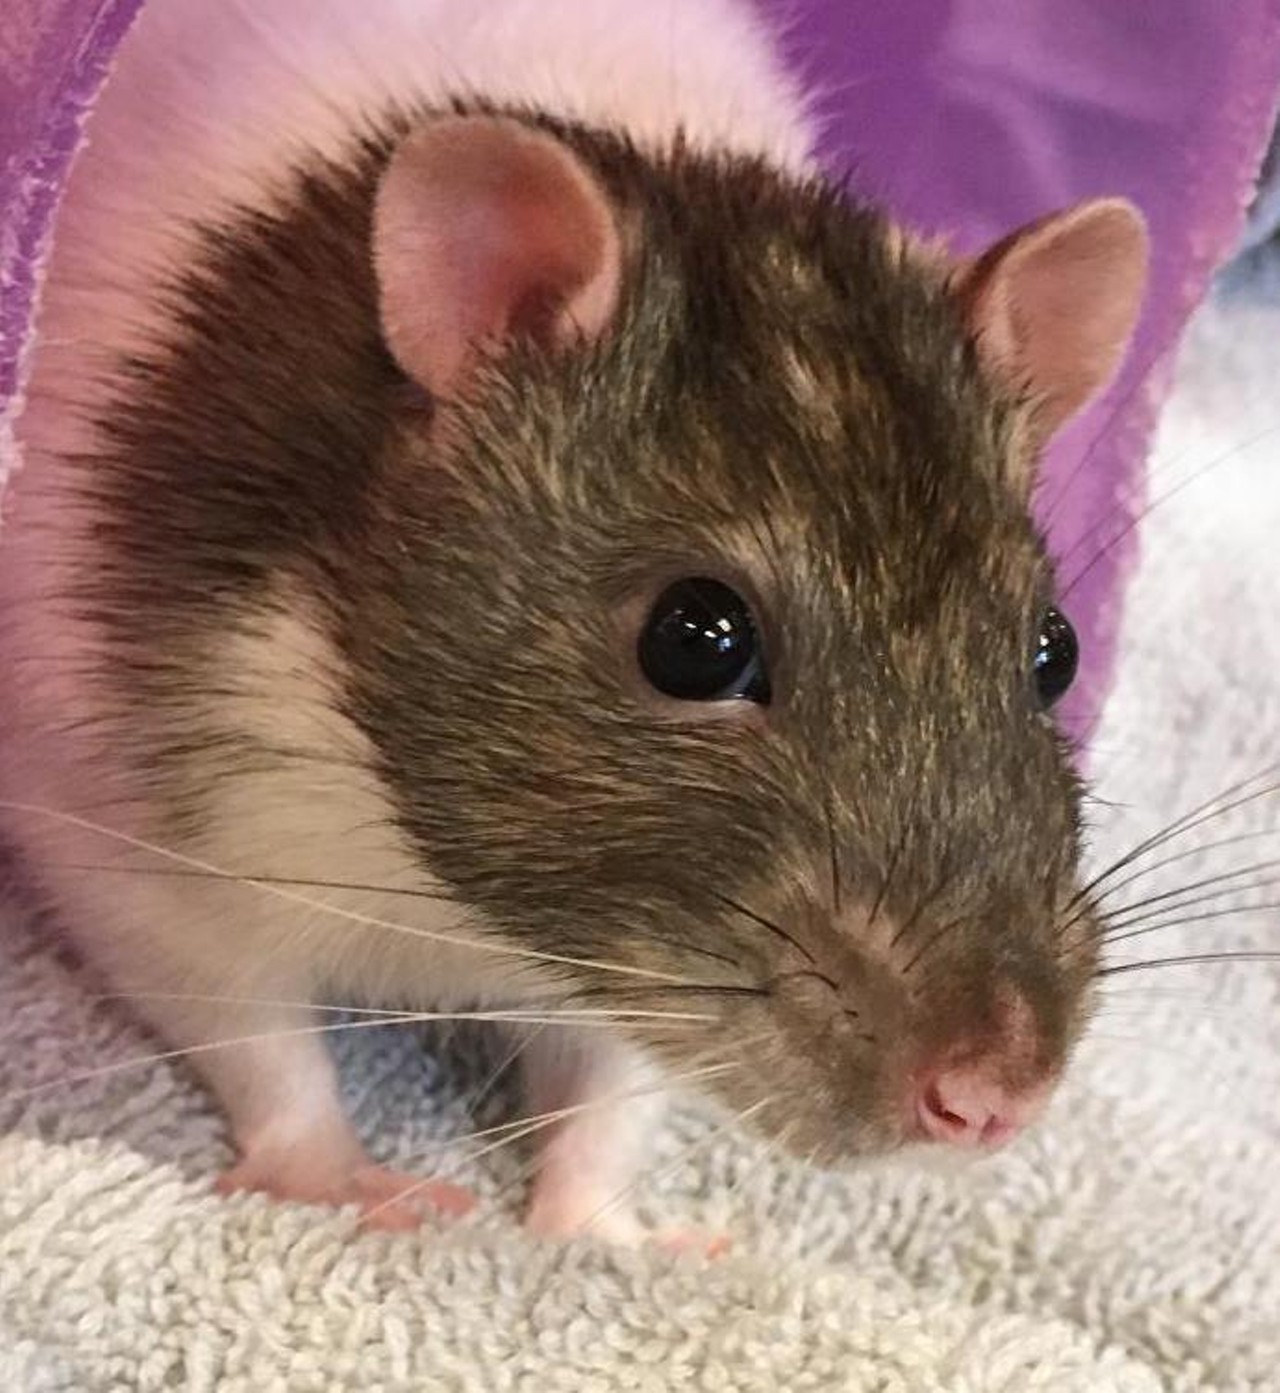 NAME: Gus
GENDER: Male
BREED: Rat
AGE: 7 months
SPECIAL CONSIDERATIONS: None
REASON I CAME TO MHS: Owner surrender
LOCATION: Berman Center for Animal Care in Westland
ID NUMBER: 860357